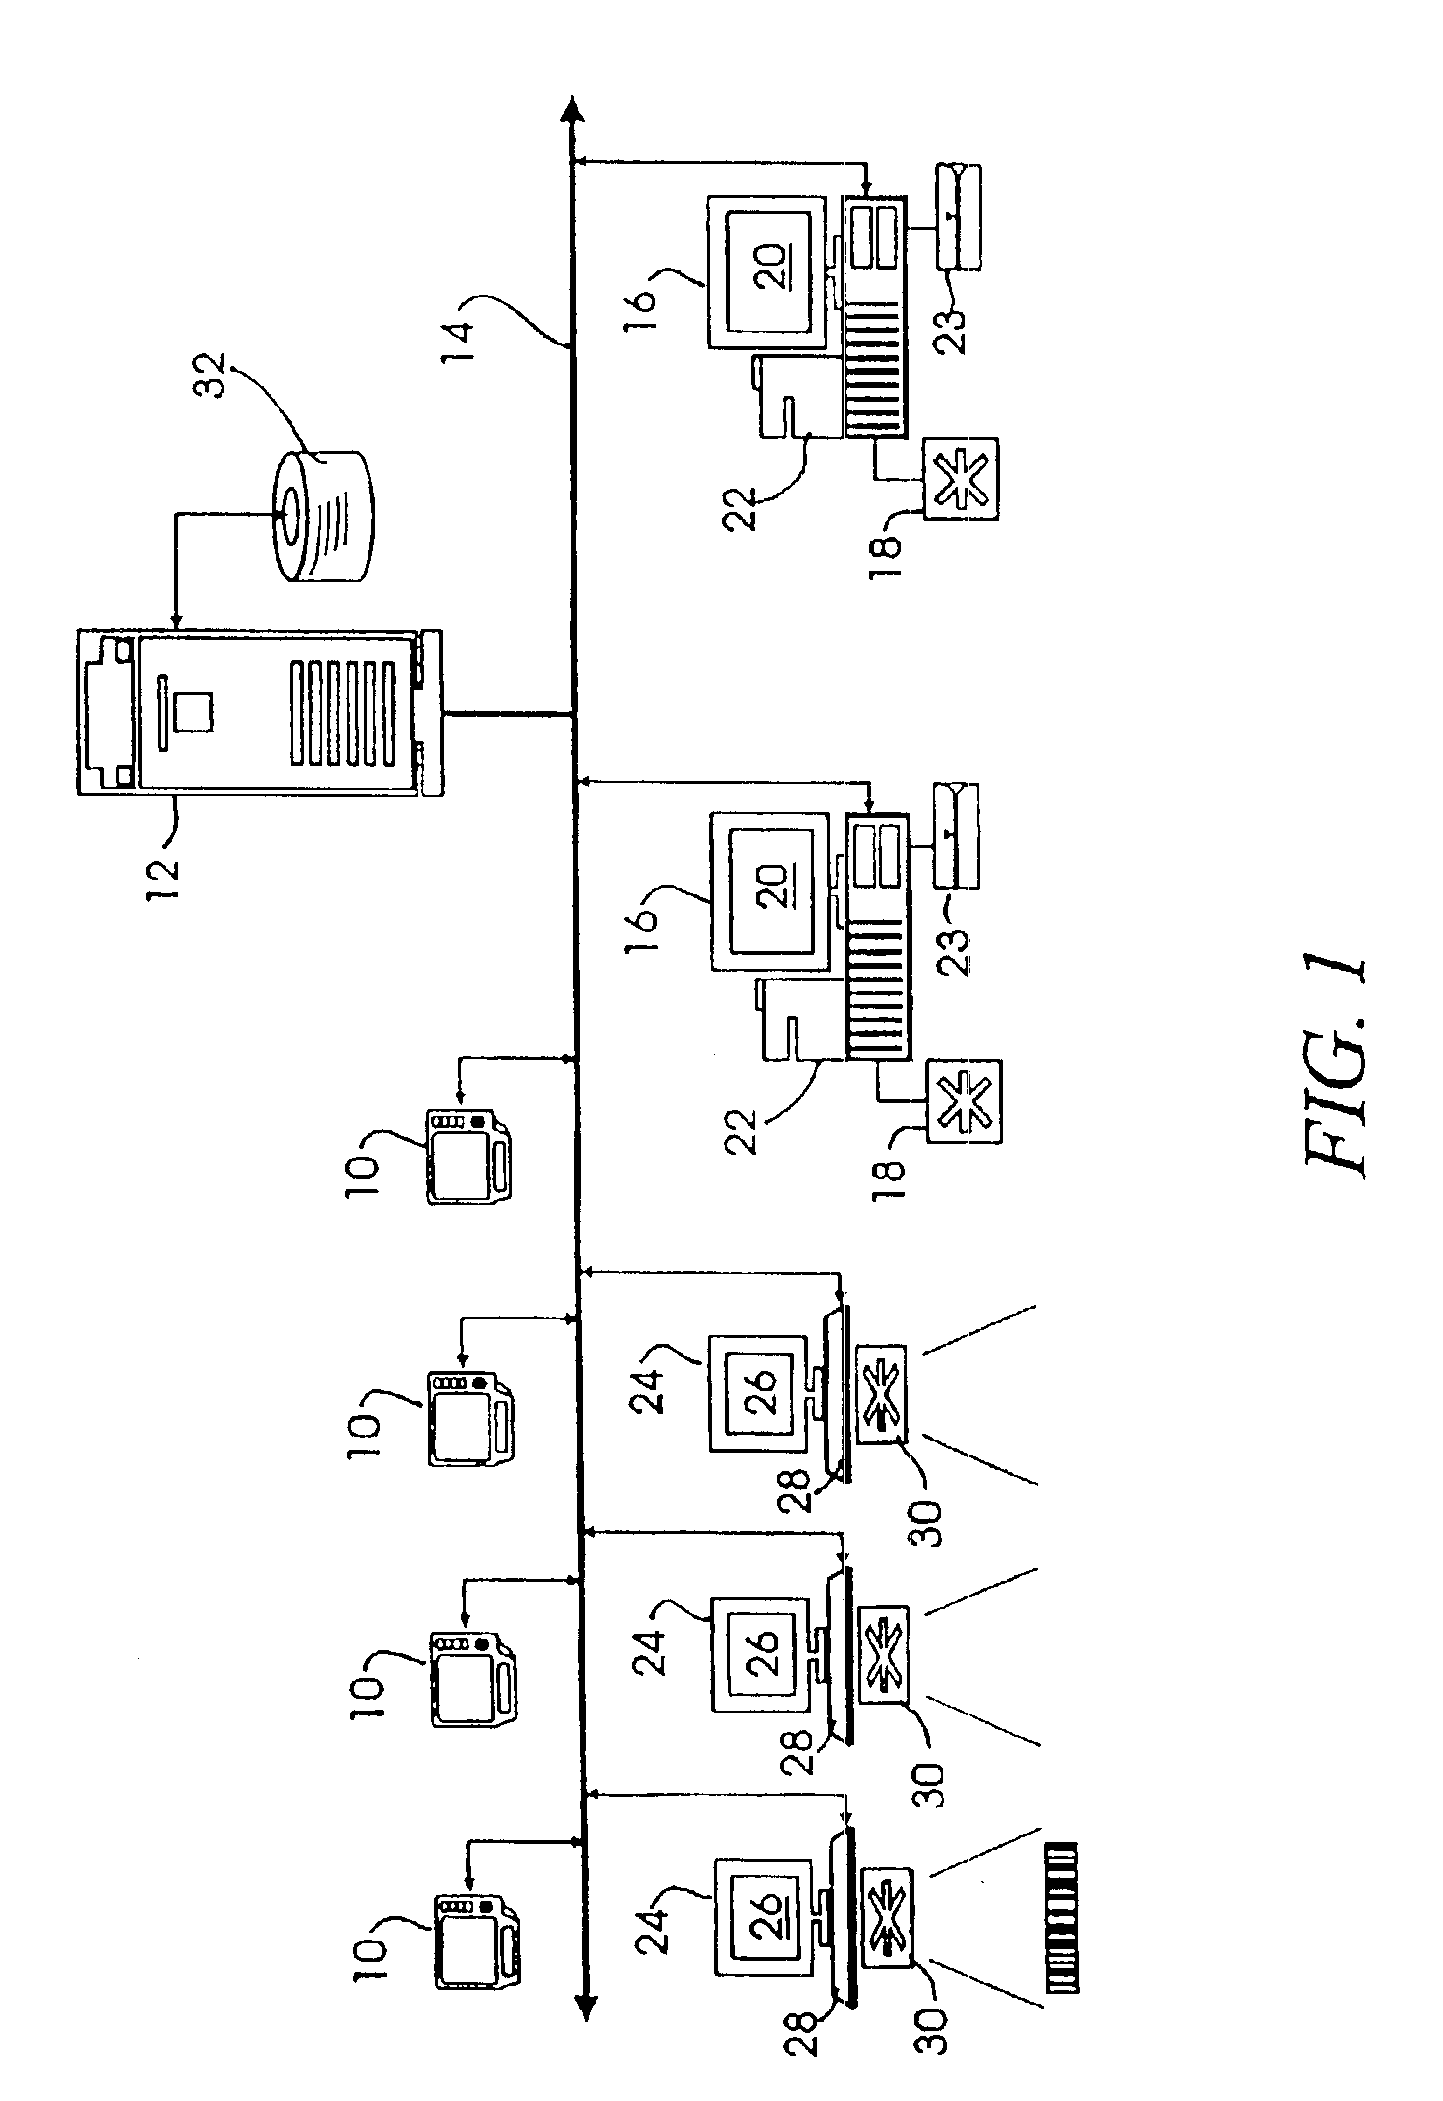 Self-scanning system with enhanced features